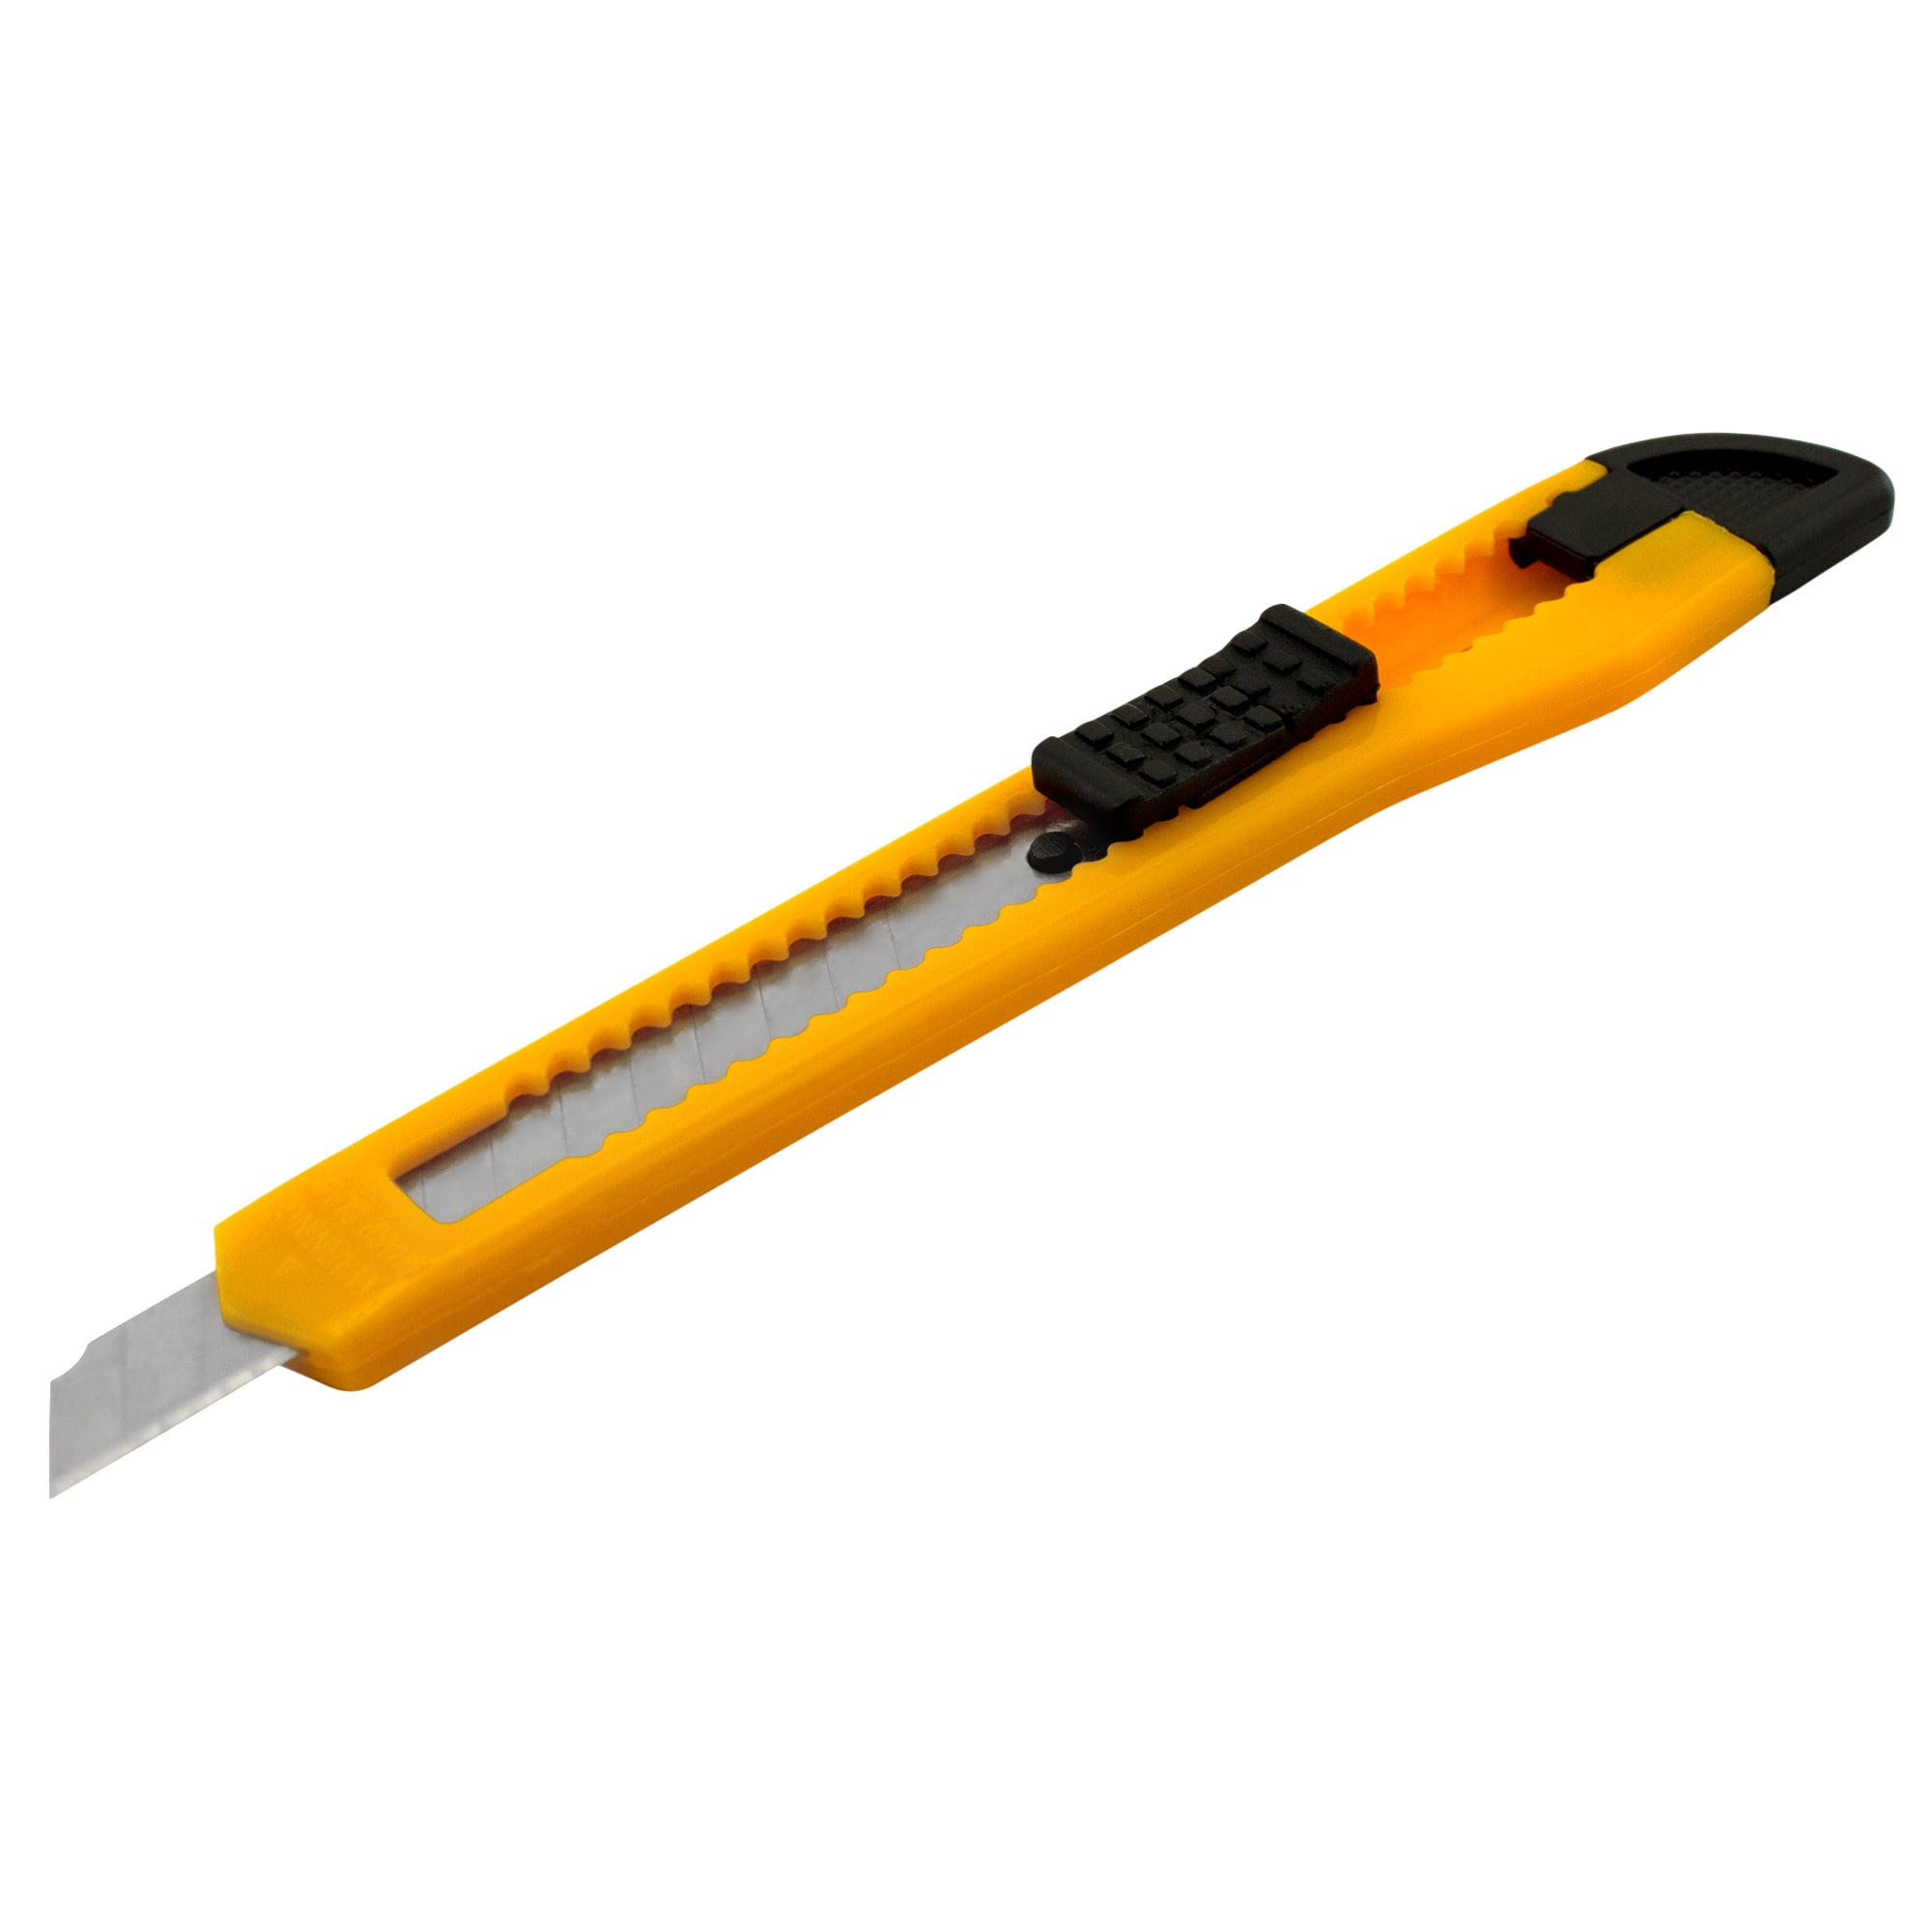 40 Pack] EcoQuality Yellow Utility Knife Retractable Box Cutter